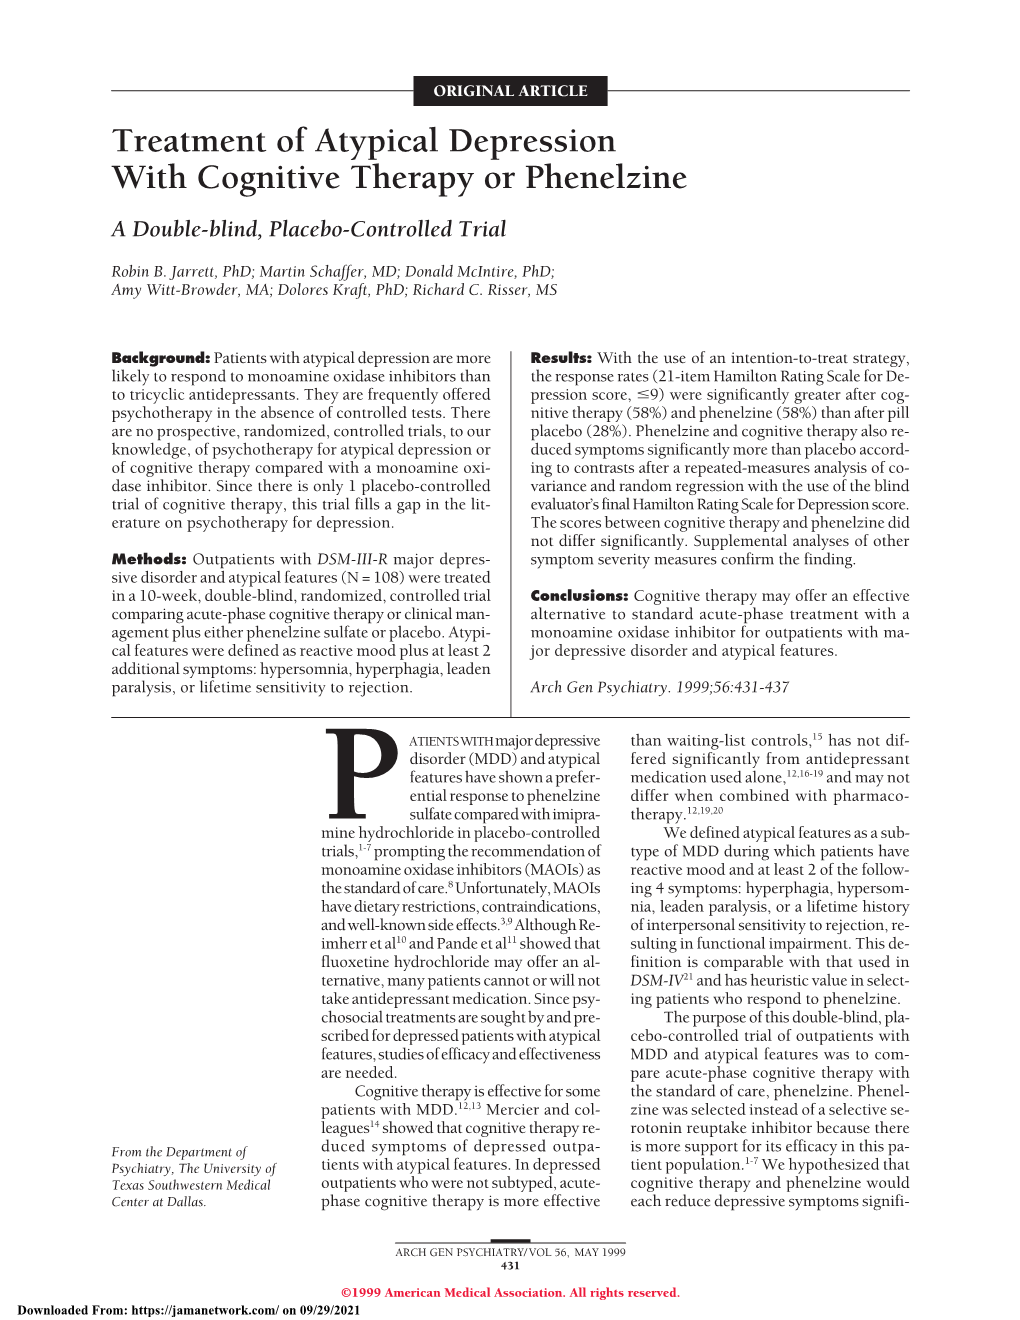 Treatment of Atypical Depression with Cognitive Therapy Or Phenelzine a Double-Blind, Placebo-Controlled Trial